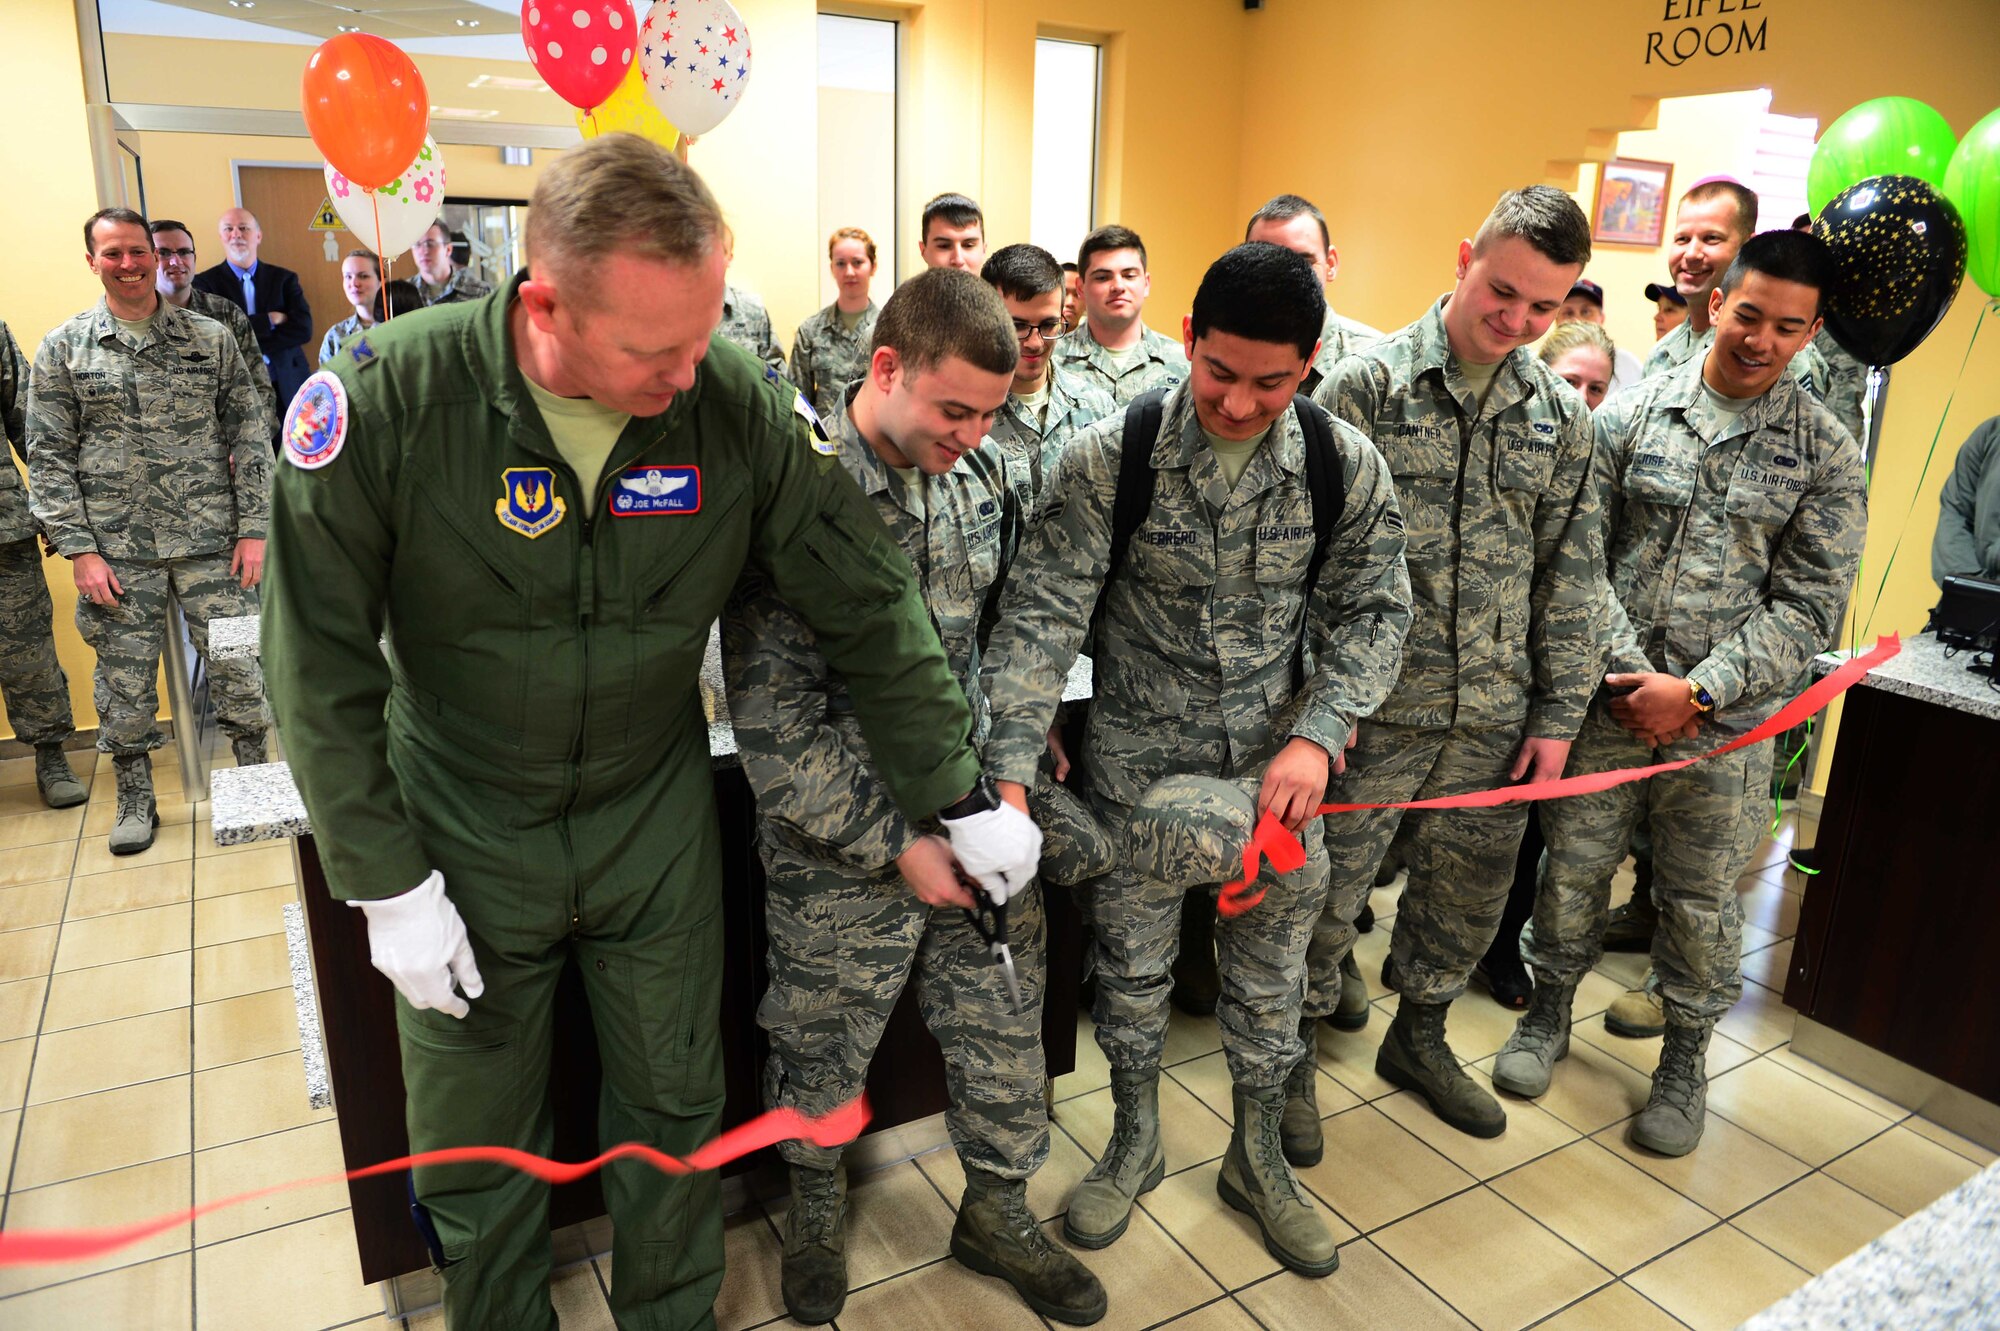 Col. Joseph McFall, 52nd Fighter Wing commander, and Spangdahlem Airmen cut the ceremonial ribbon at the updated Dining Facility at Spangdahlem Air Base after several months of renovations that made meal service unavailable to the Saber community, April 10, 2017. Upgrades to the DFAC include new kitchen equipment like ovens and a walk in fridge, air conditioning installed in the kitchen, a new service line, repainting the walls and adding murals in the dining rooms to reflect the base's connection to the local community. (U.S. Air Force photo by Senior Airman Joshua R. M. Dewberry)